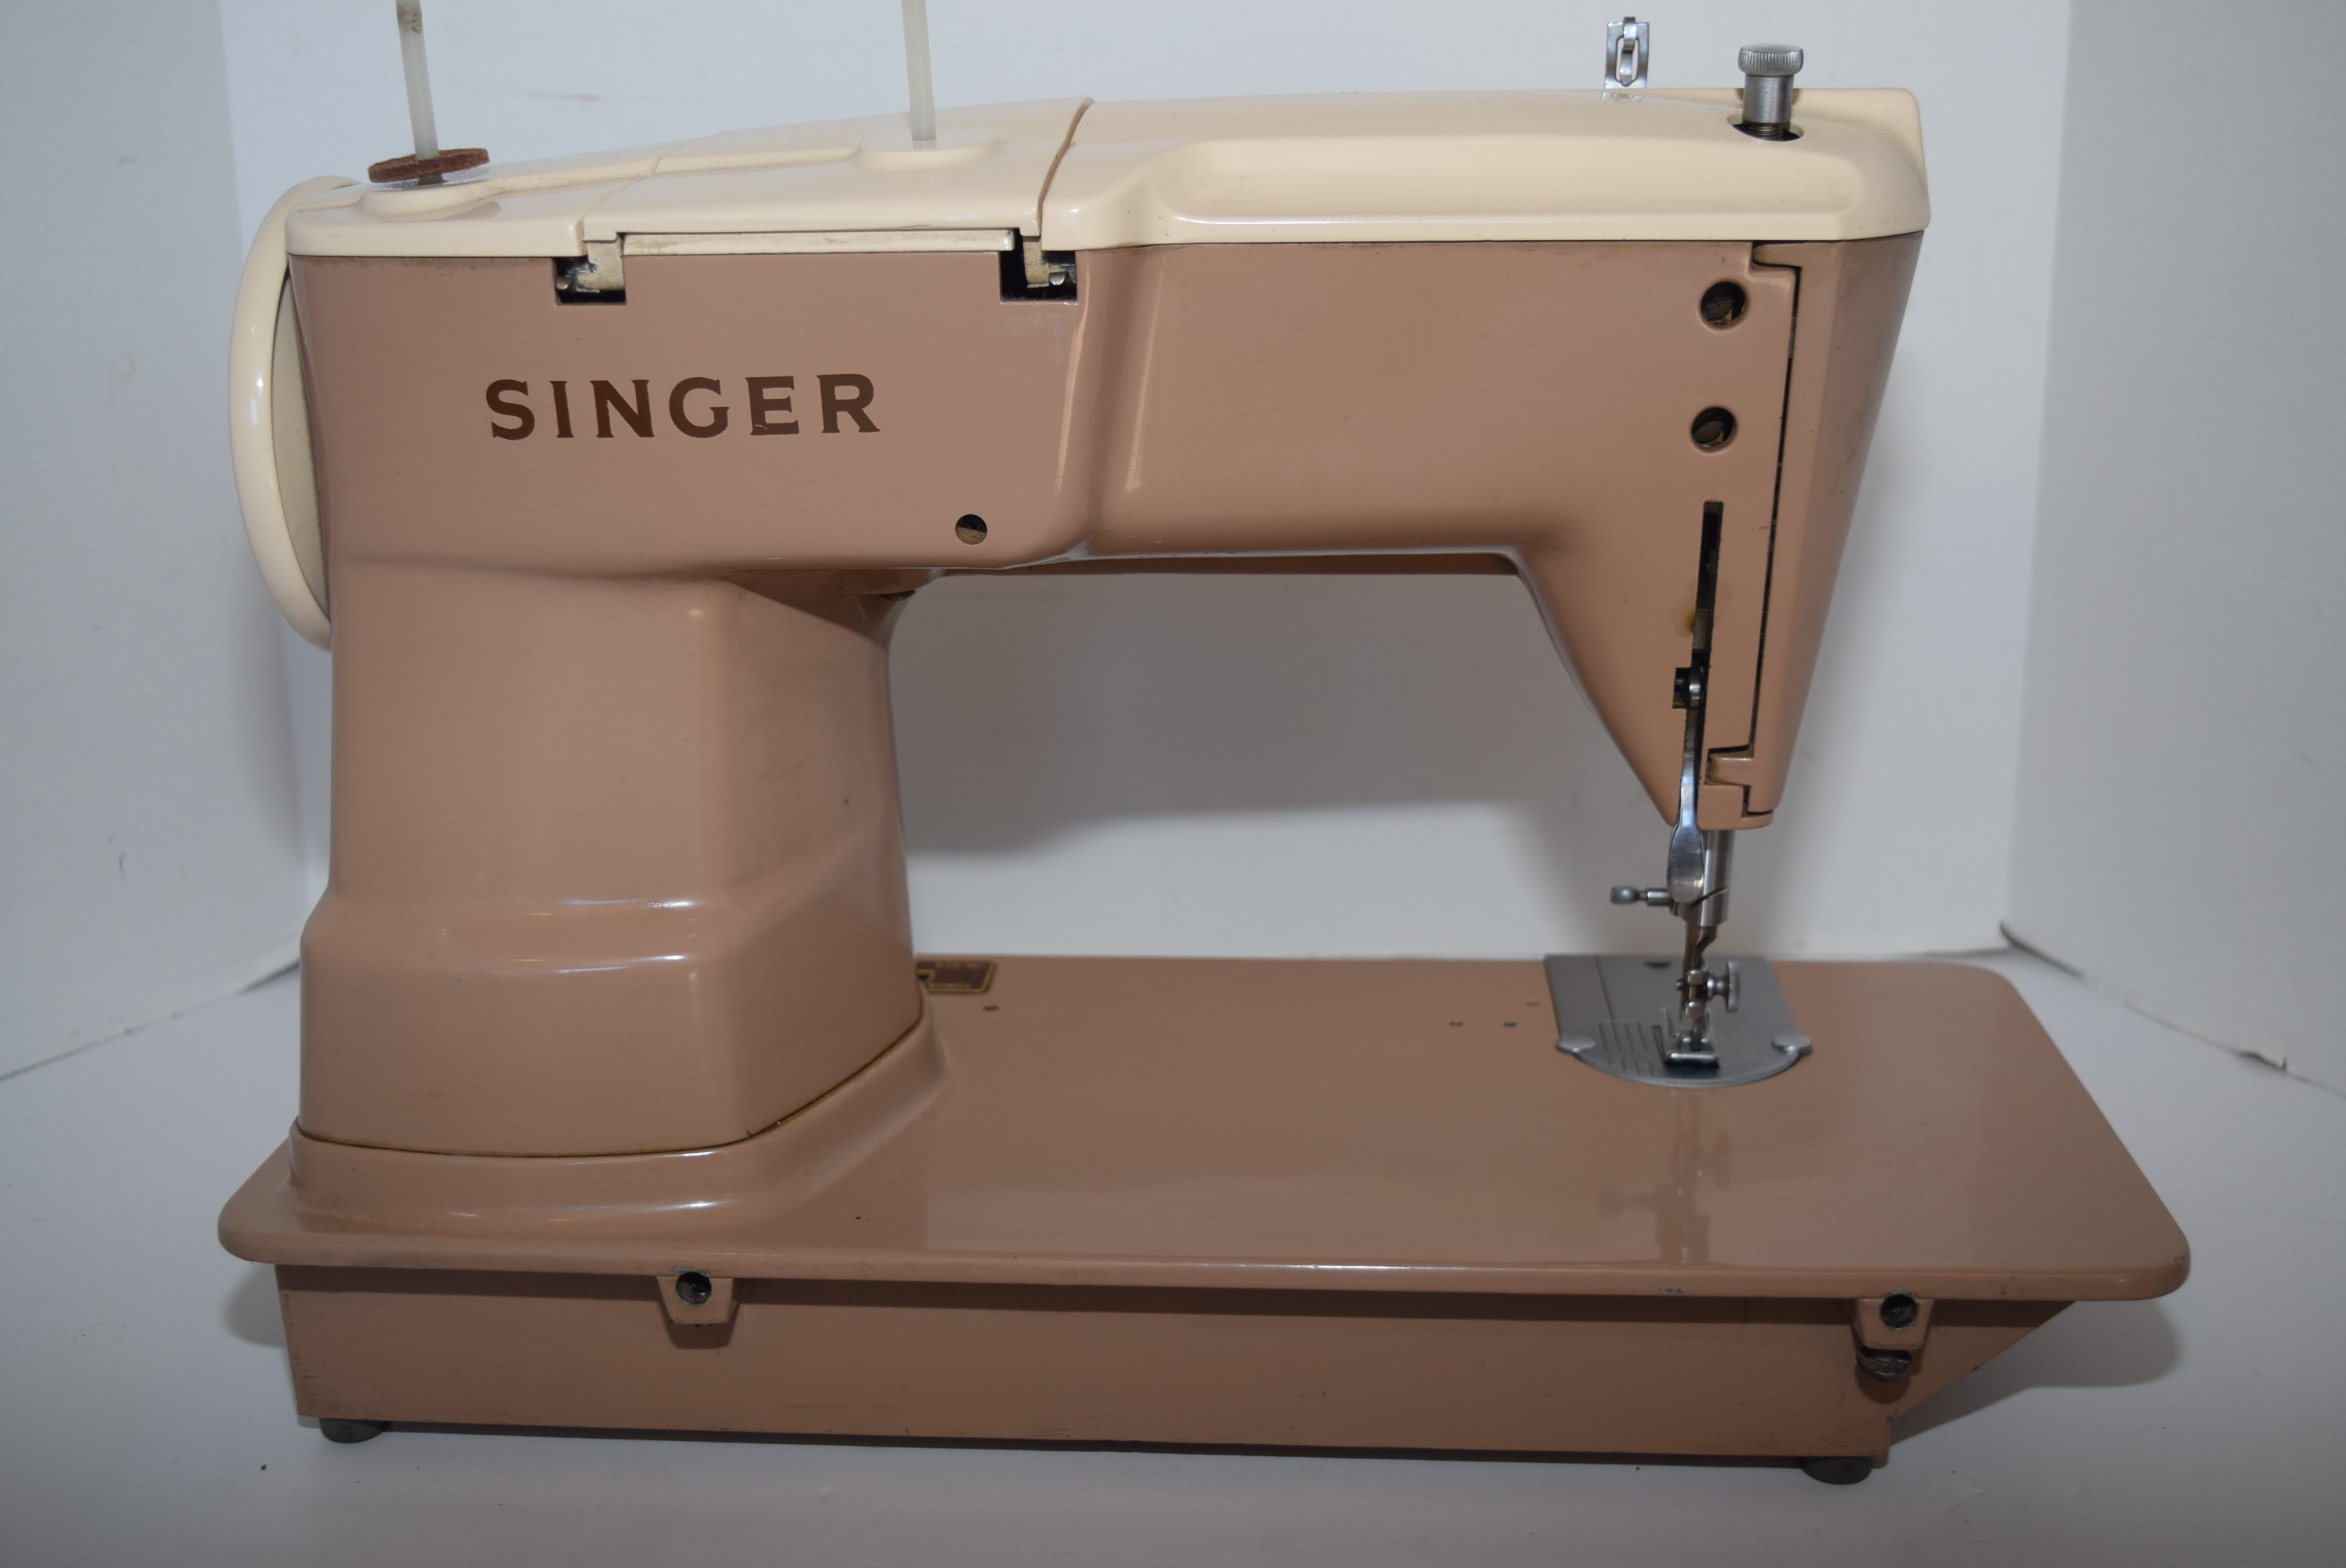 FREE SHIPPING. Vintage Singer slant buttonholer from the 1950s